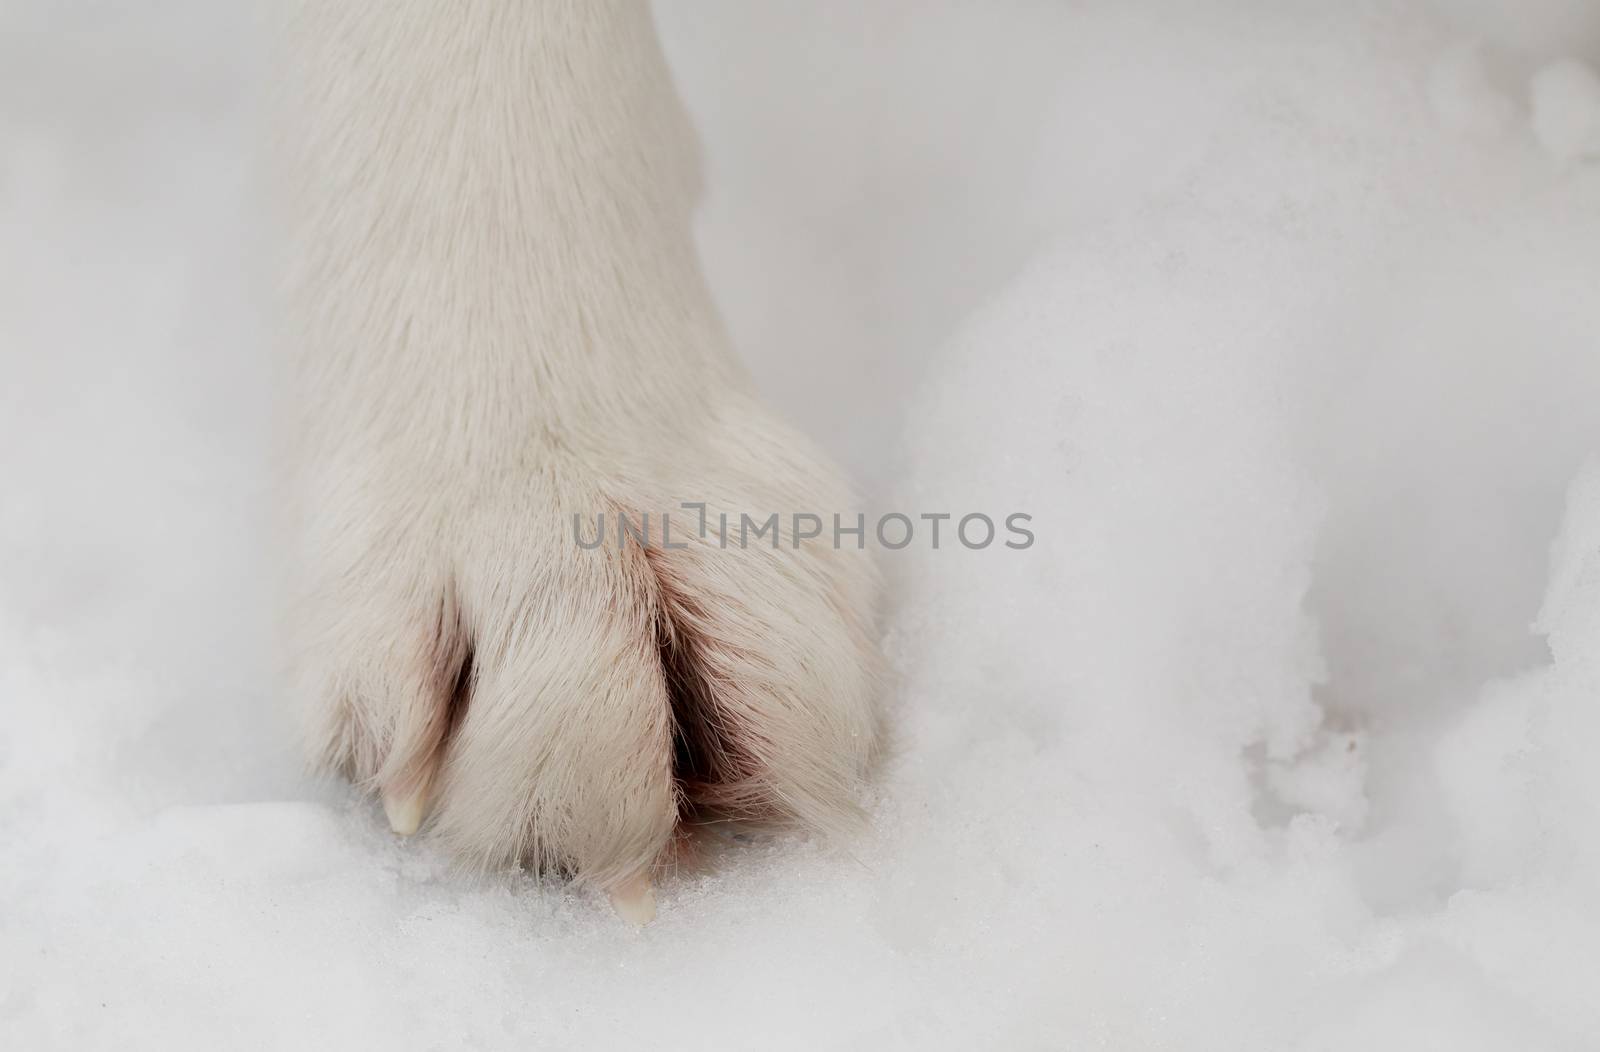 Paw of Siberian Husky in the snow.